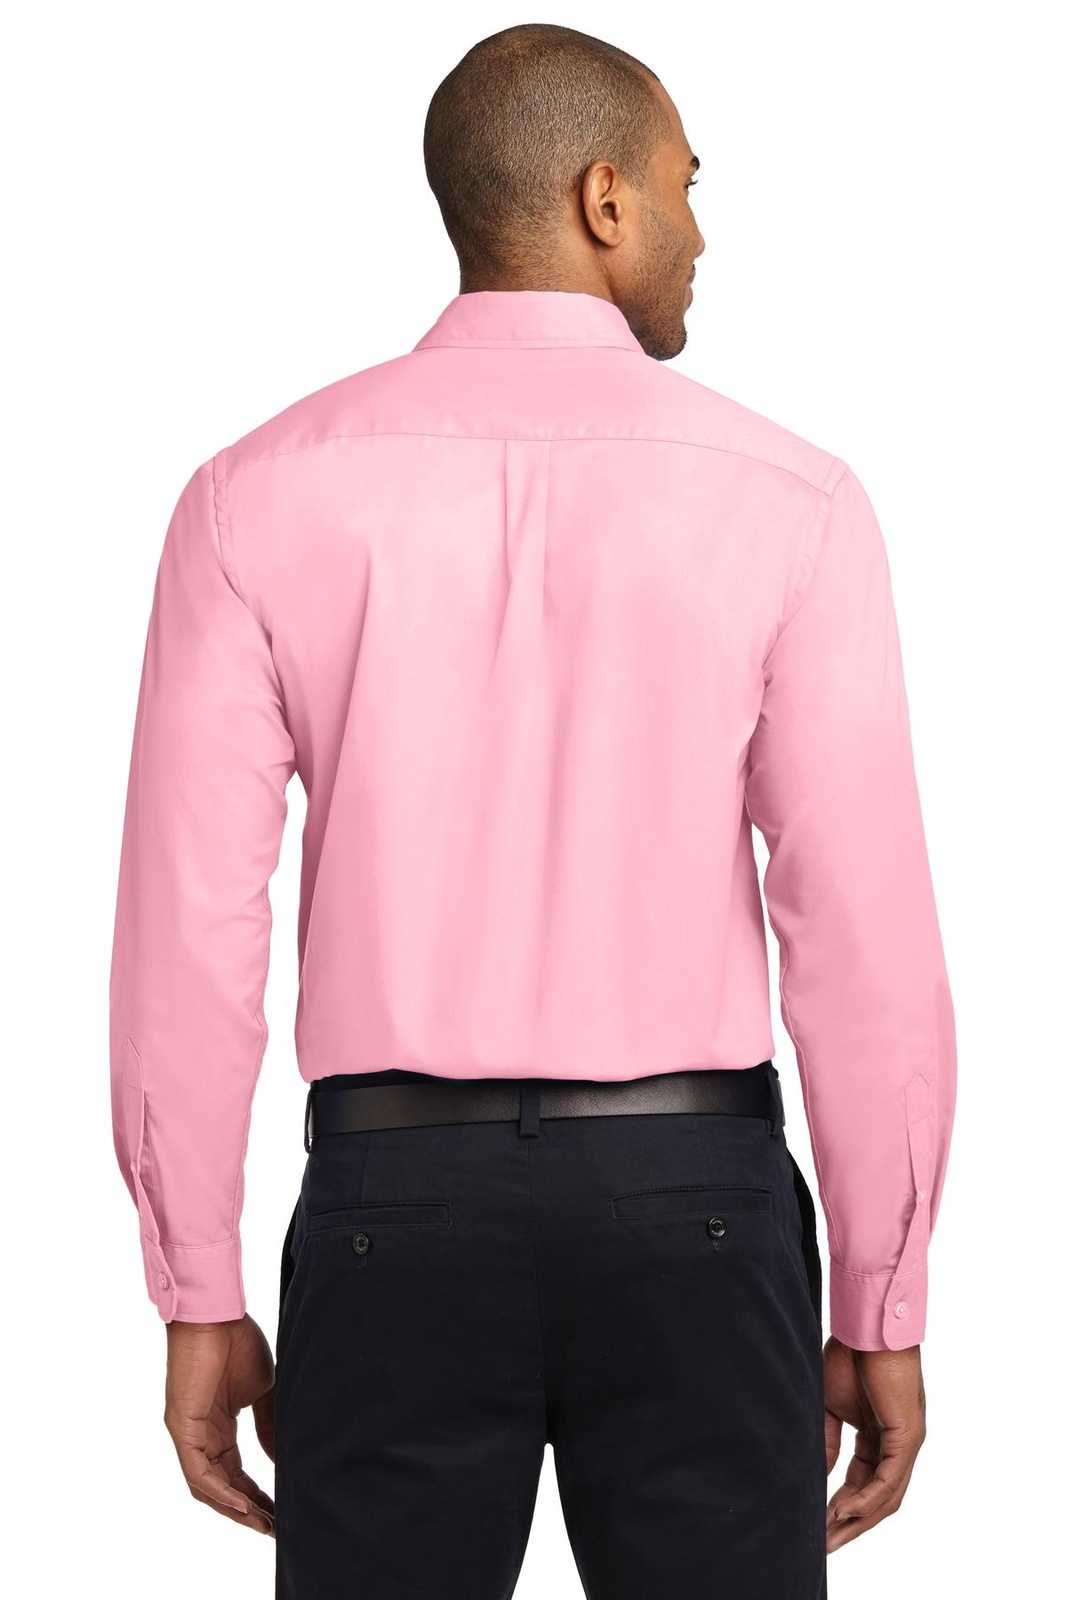 Port Authority S608 Long Sleeve Easy Care Shirt - Light Pink - HIT a Double - 1